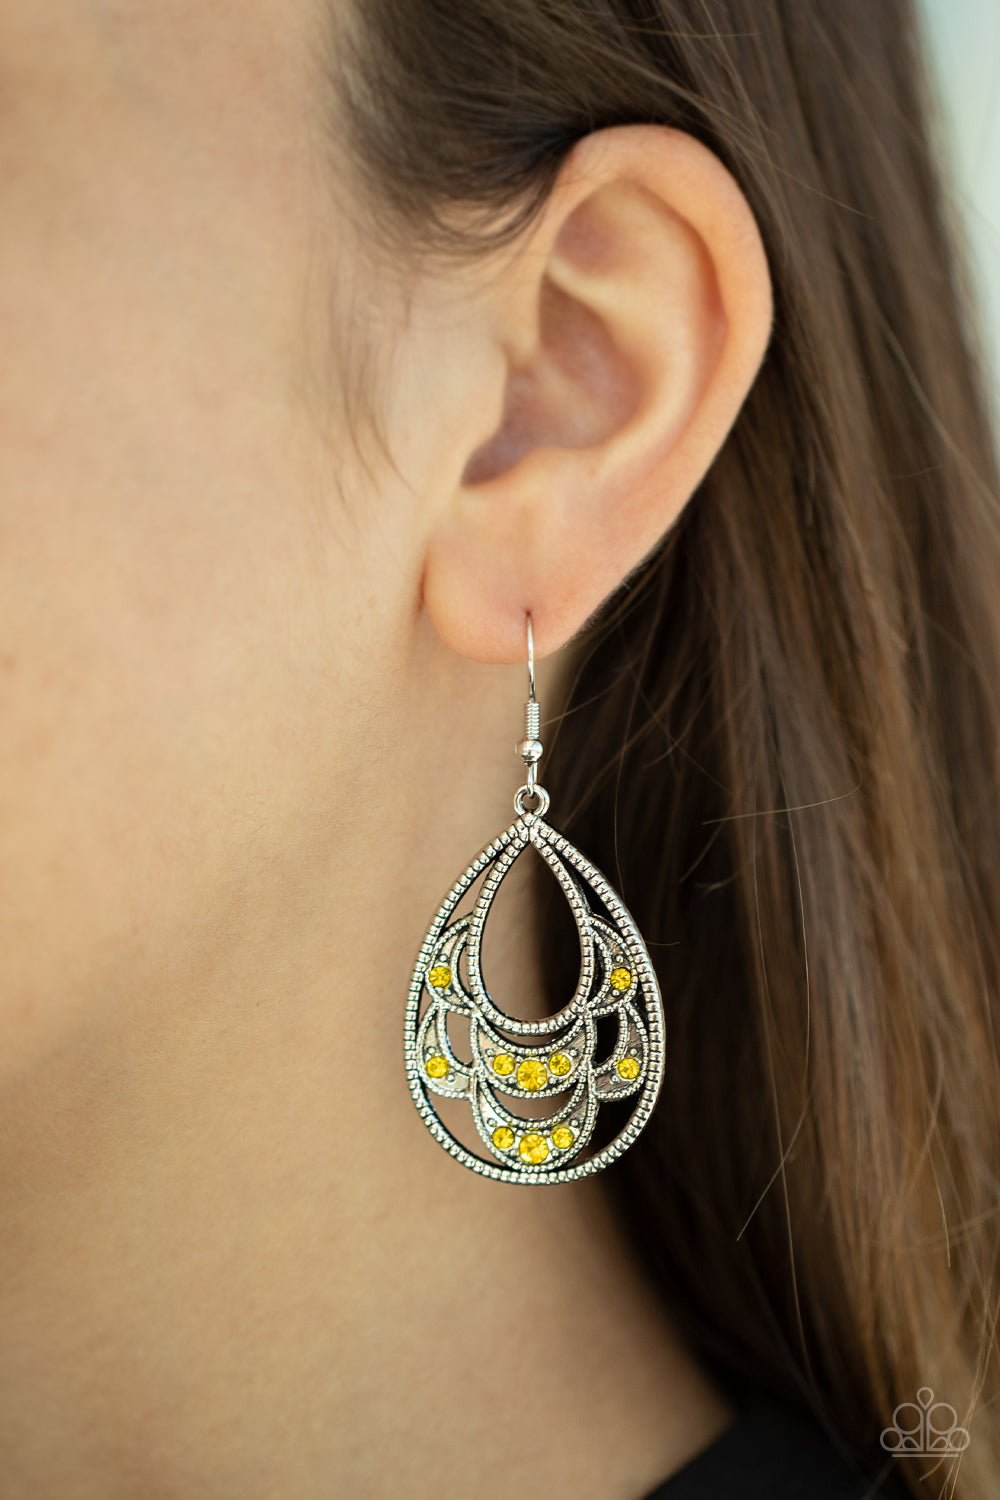 Malibu Macrame - Yellow and Silver Earrings - Paparazzi Accessories - Dotted in dainty yellow rhinestones, studded silver petals layer into an ornate silver teardrop for a whimsical look. Earring attaches to a standard fishhook fitting.